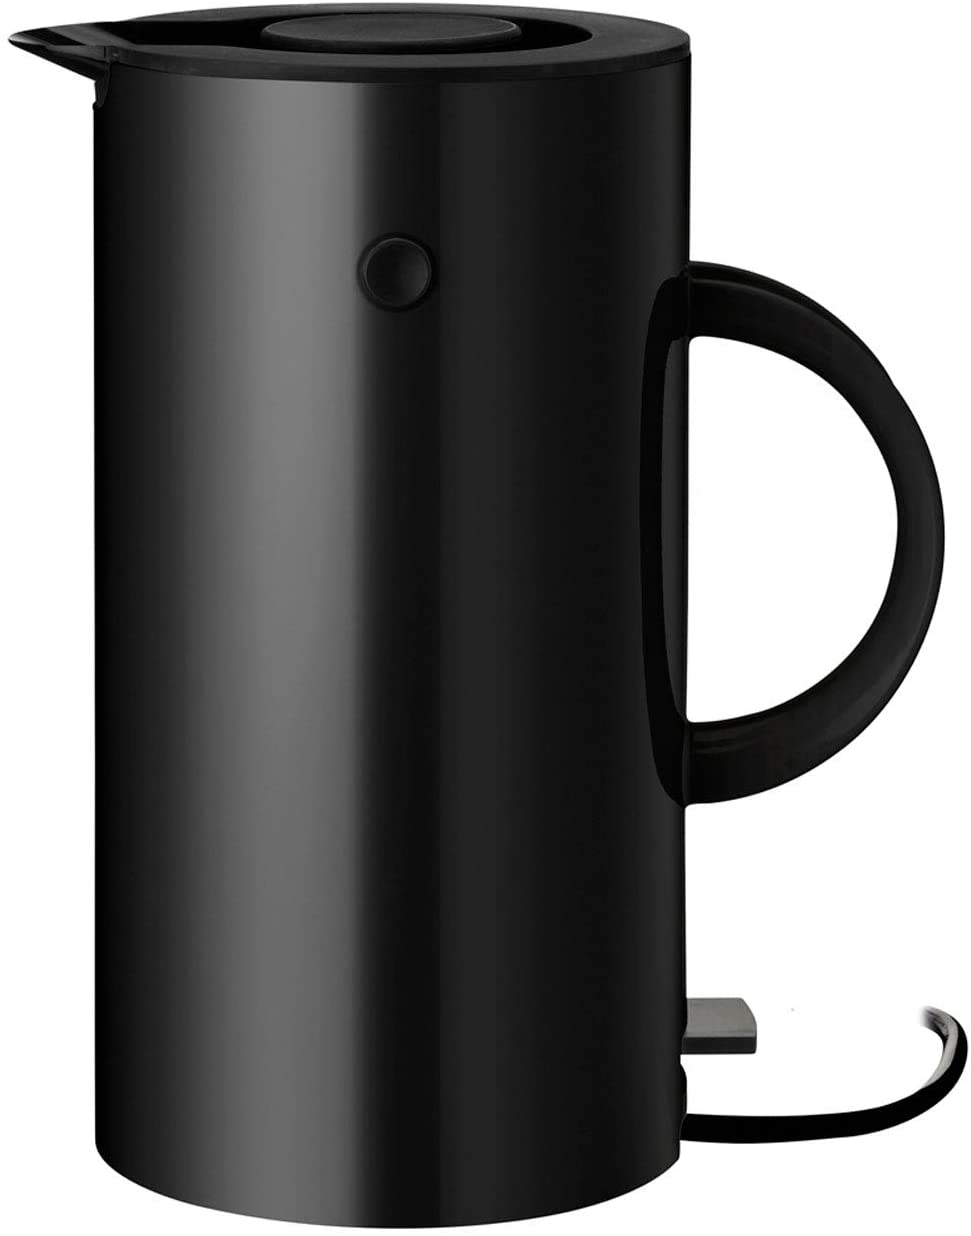 Stelton EM77 Electric Cooker, Kettle in Scandinavian Design, Quick Boiling, Low Energy Consumption, Removable Limescale Filter, Safety Switch, 1.5 Litres, Black